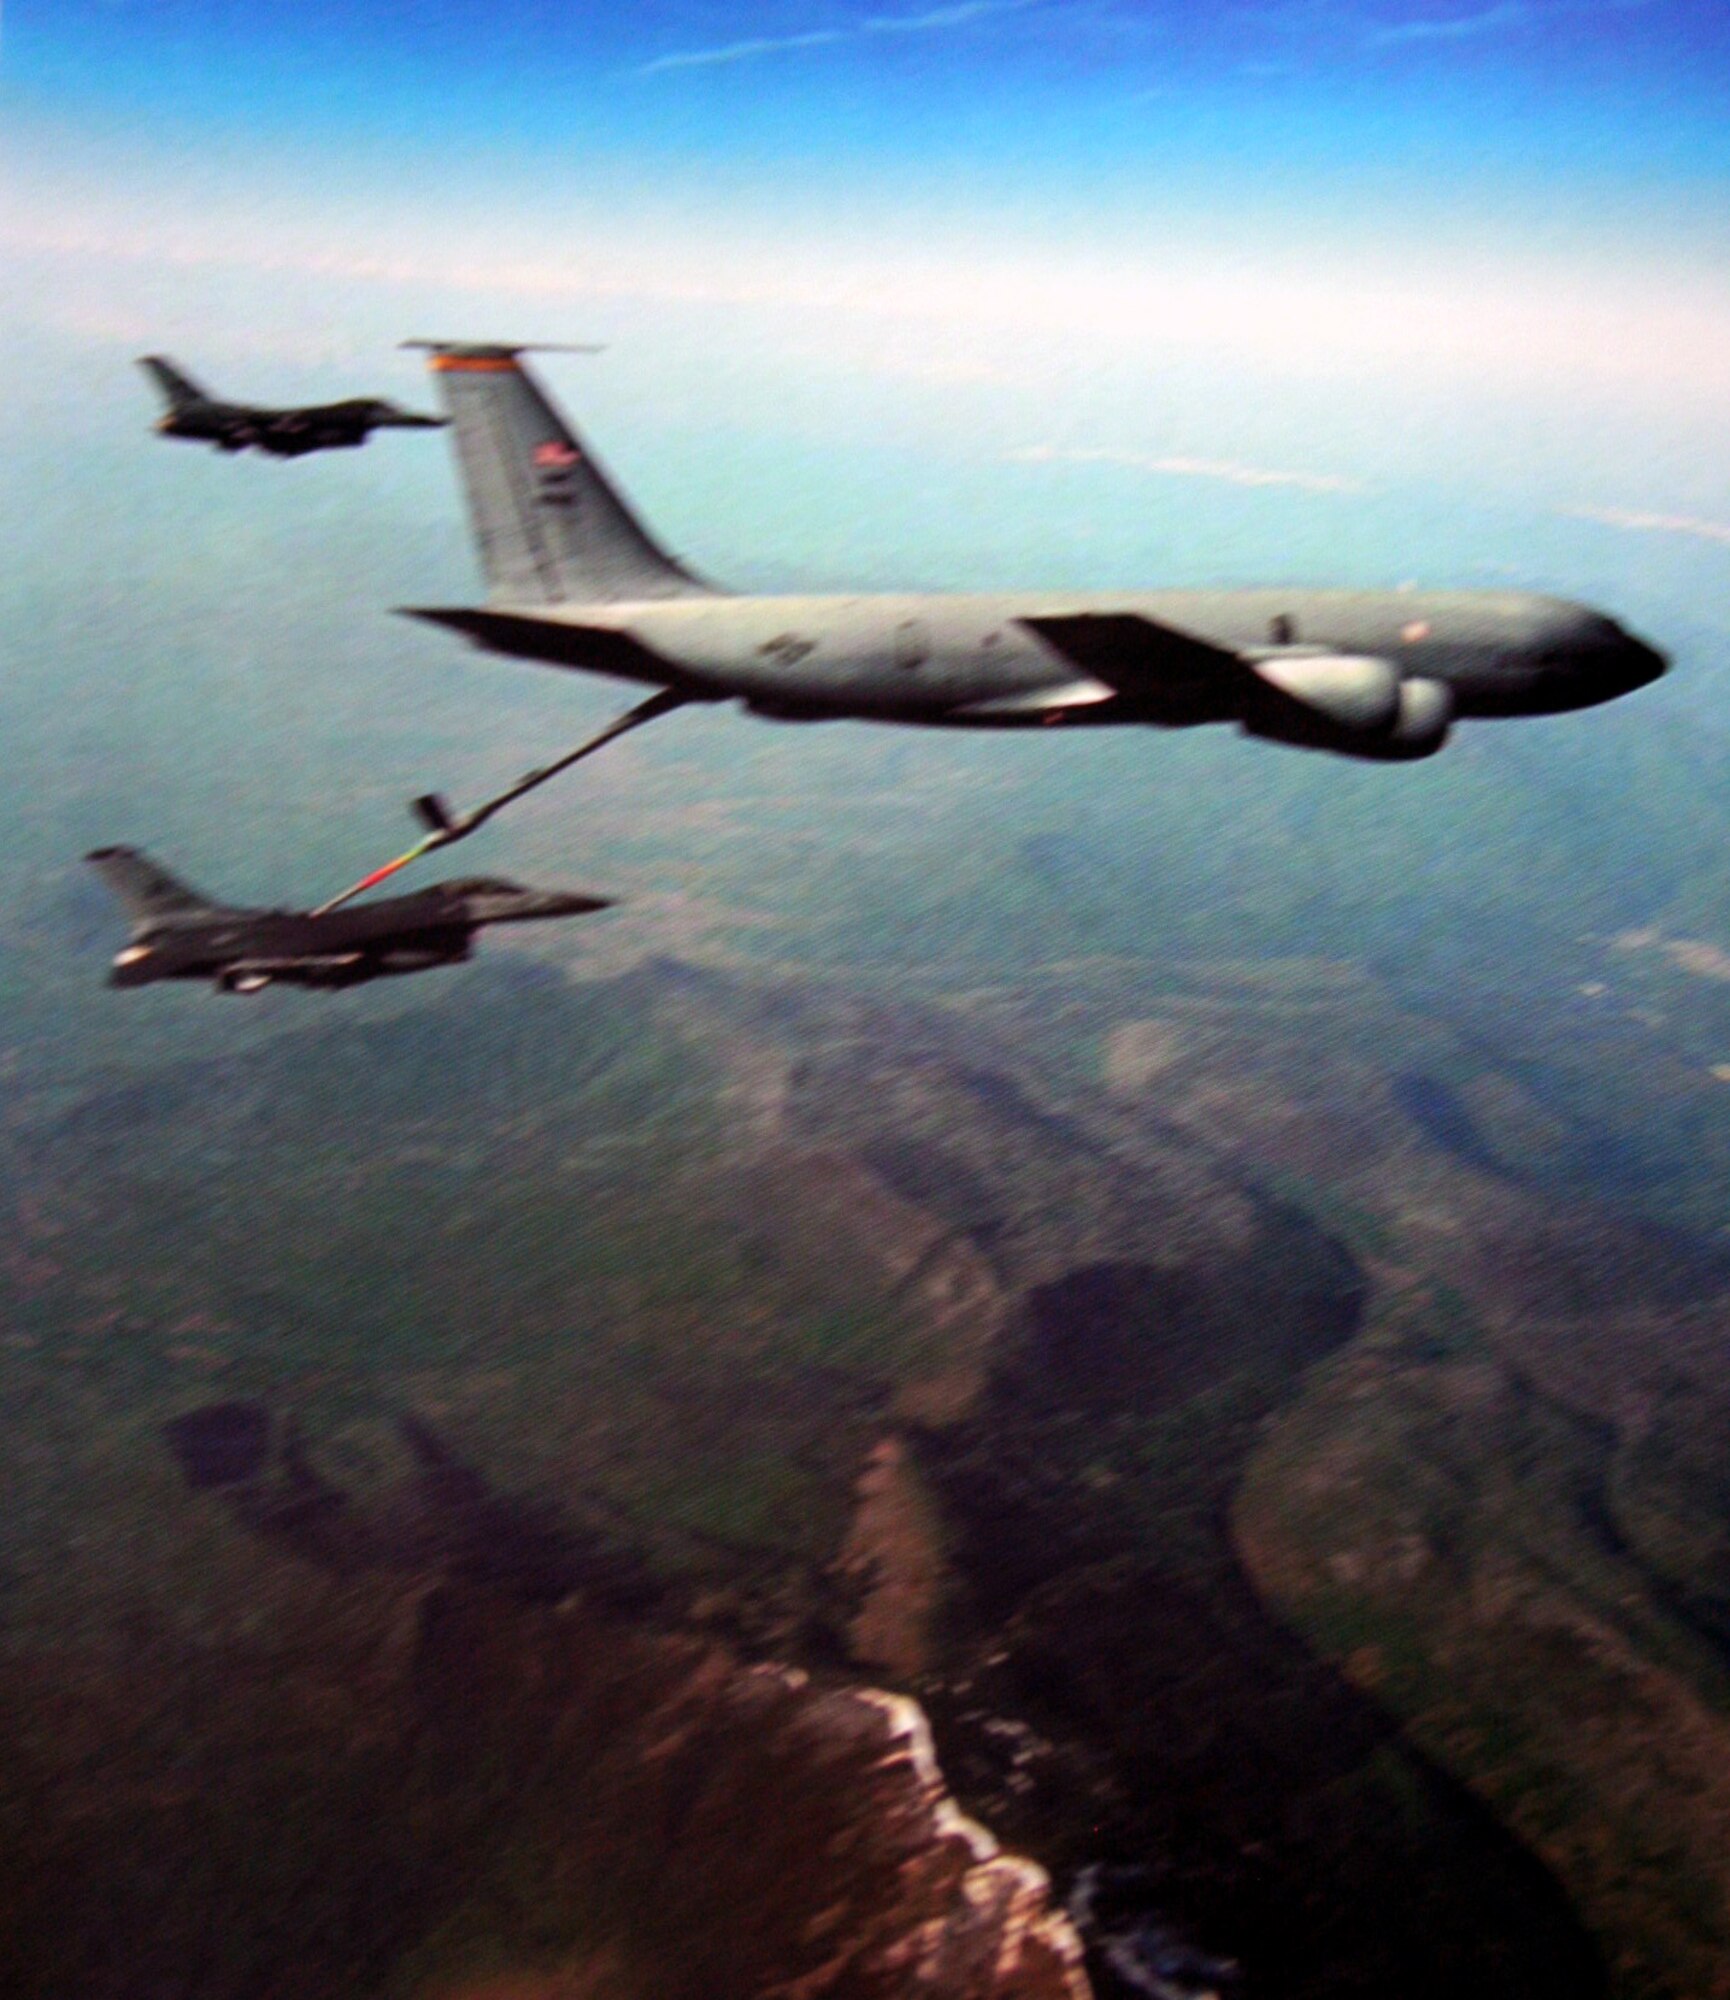 A KC-135R Stratotanker refuels two F-16 Fighting Falcons over northern Bosnia on a combat air patrol mission during Operation Allied Force in 1999. On occasion during the conflict, some tankers were in harm's way and had to change course due to the proximity of enemy aircraft. (U.S. Air Force History Photo)